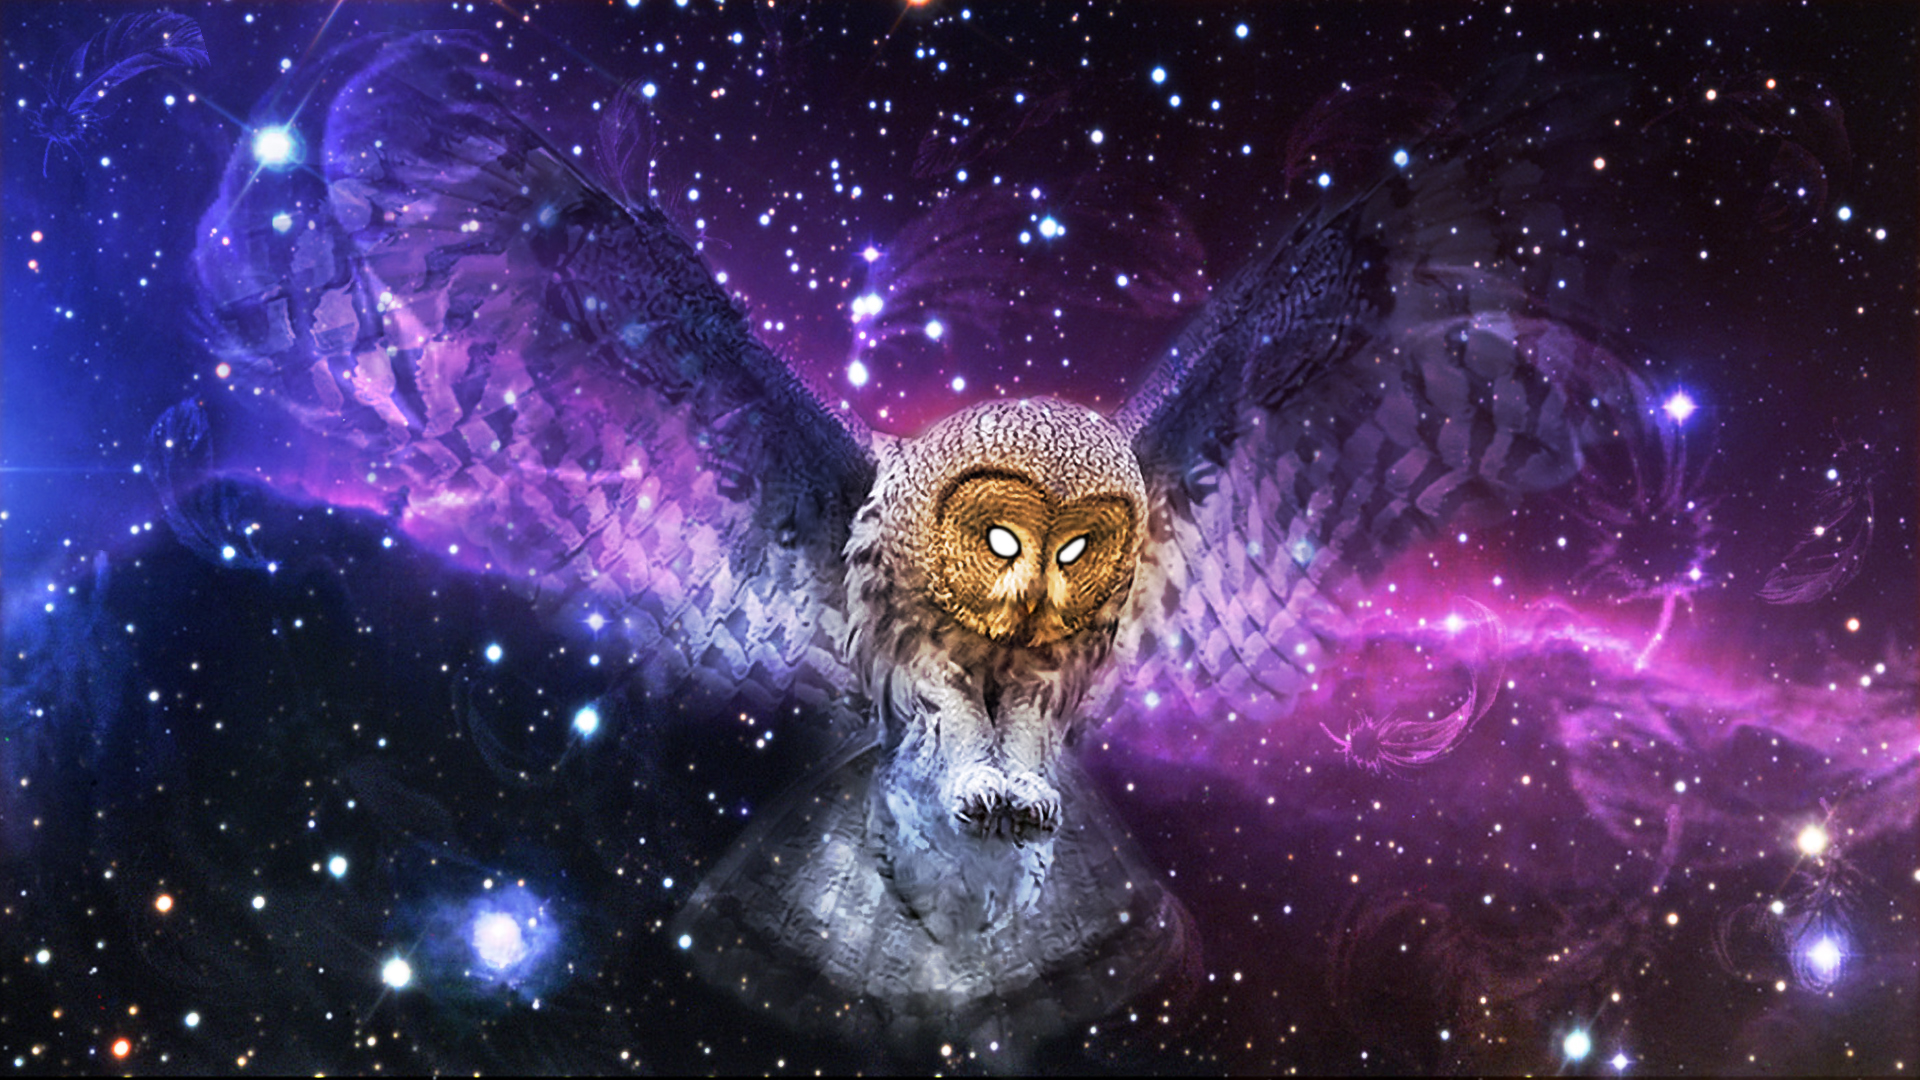 Purple Owl Wallpaper / Purple, red, and teal owl painting, owl, digital art. About Creditor